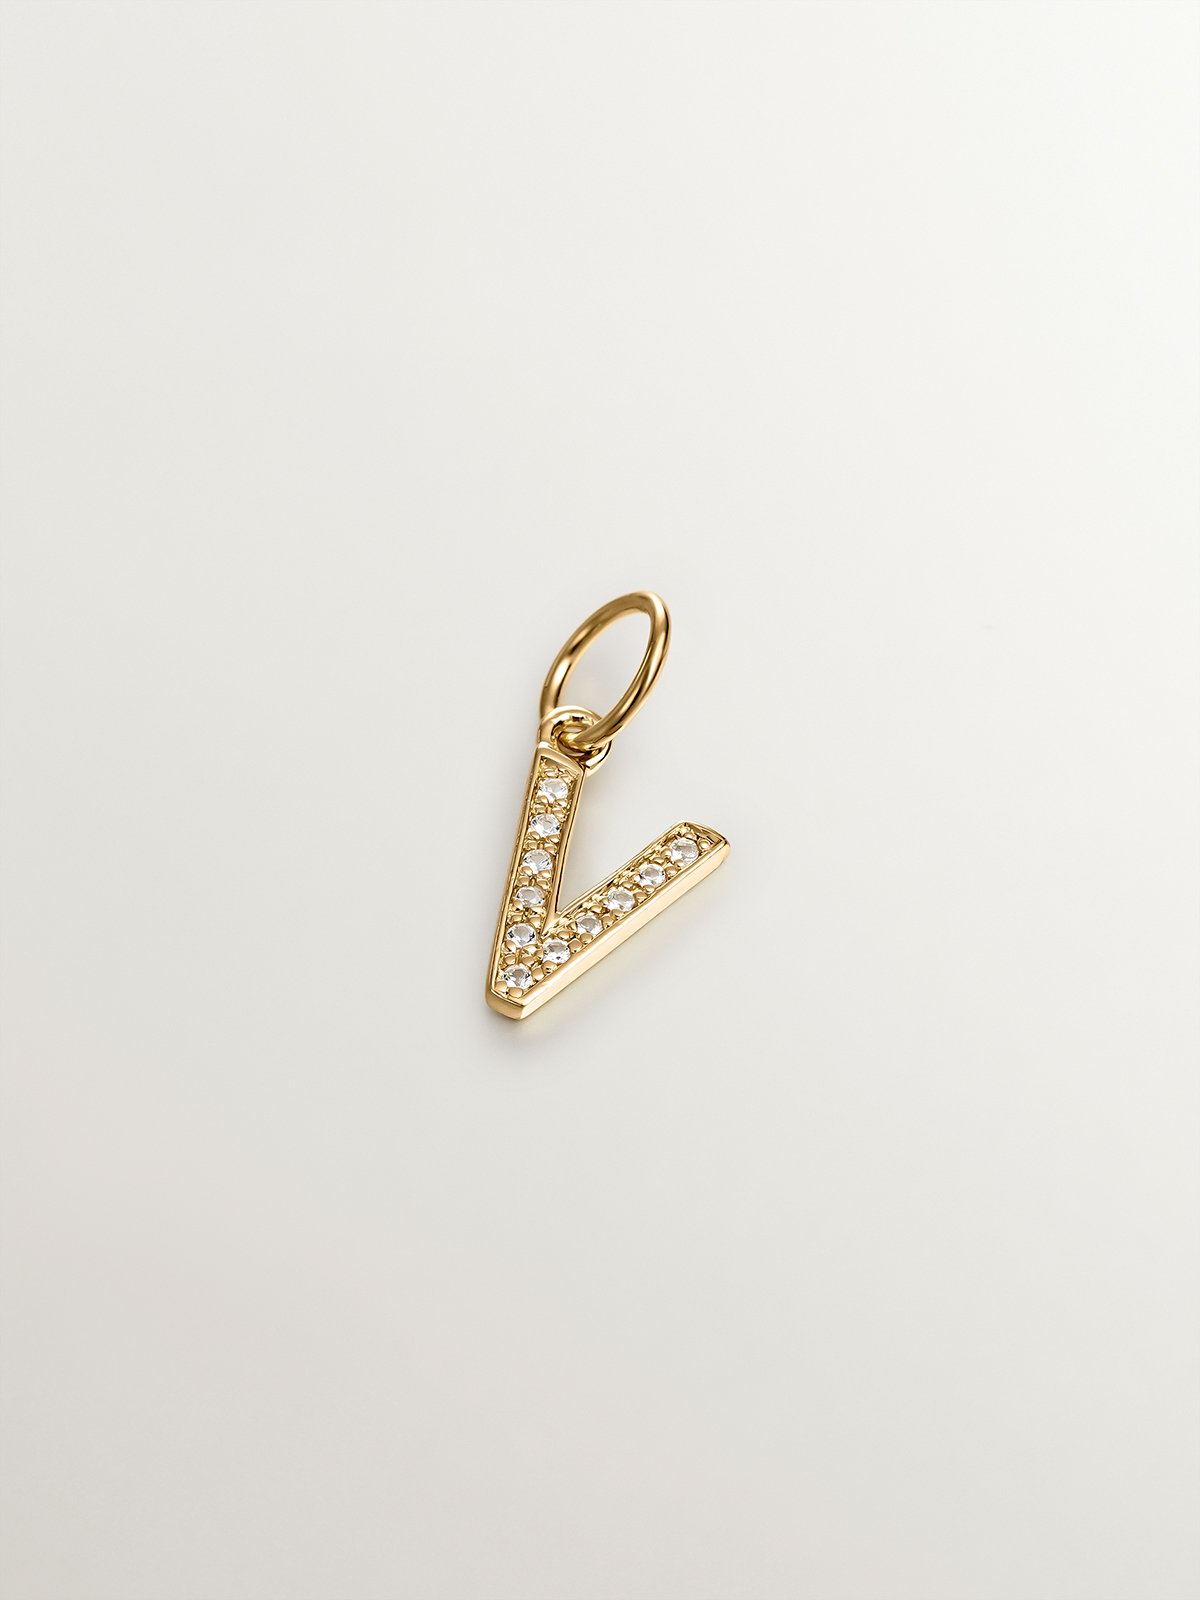 V initial charm made of 925 silver, bathed in 18K yellow gold and adorned with white topaz.